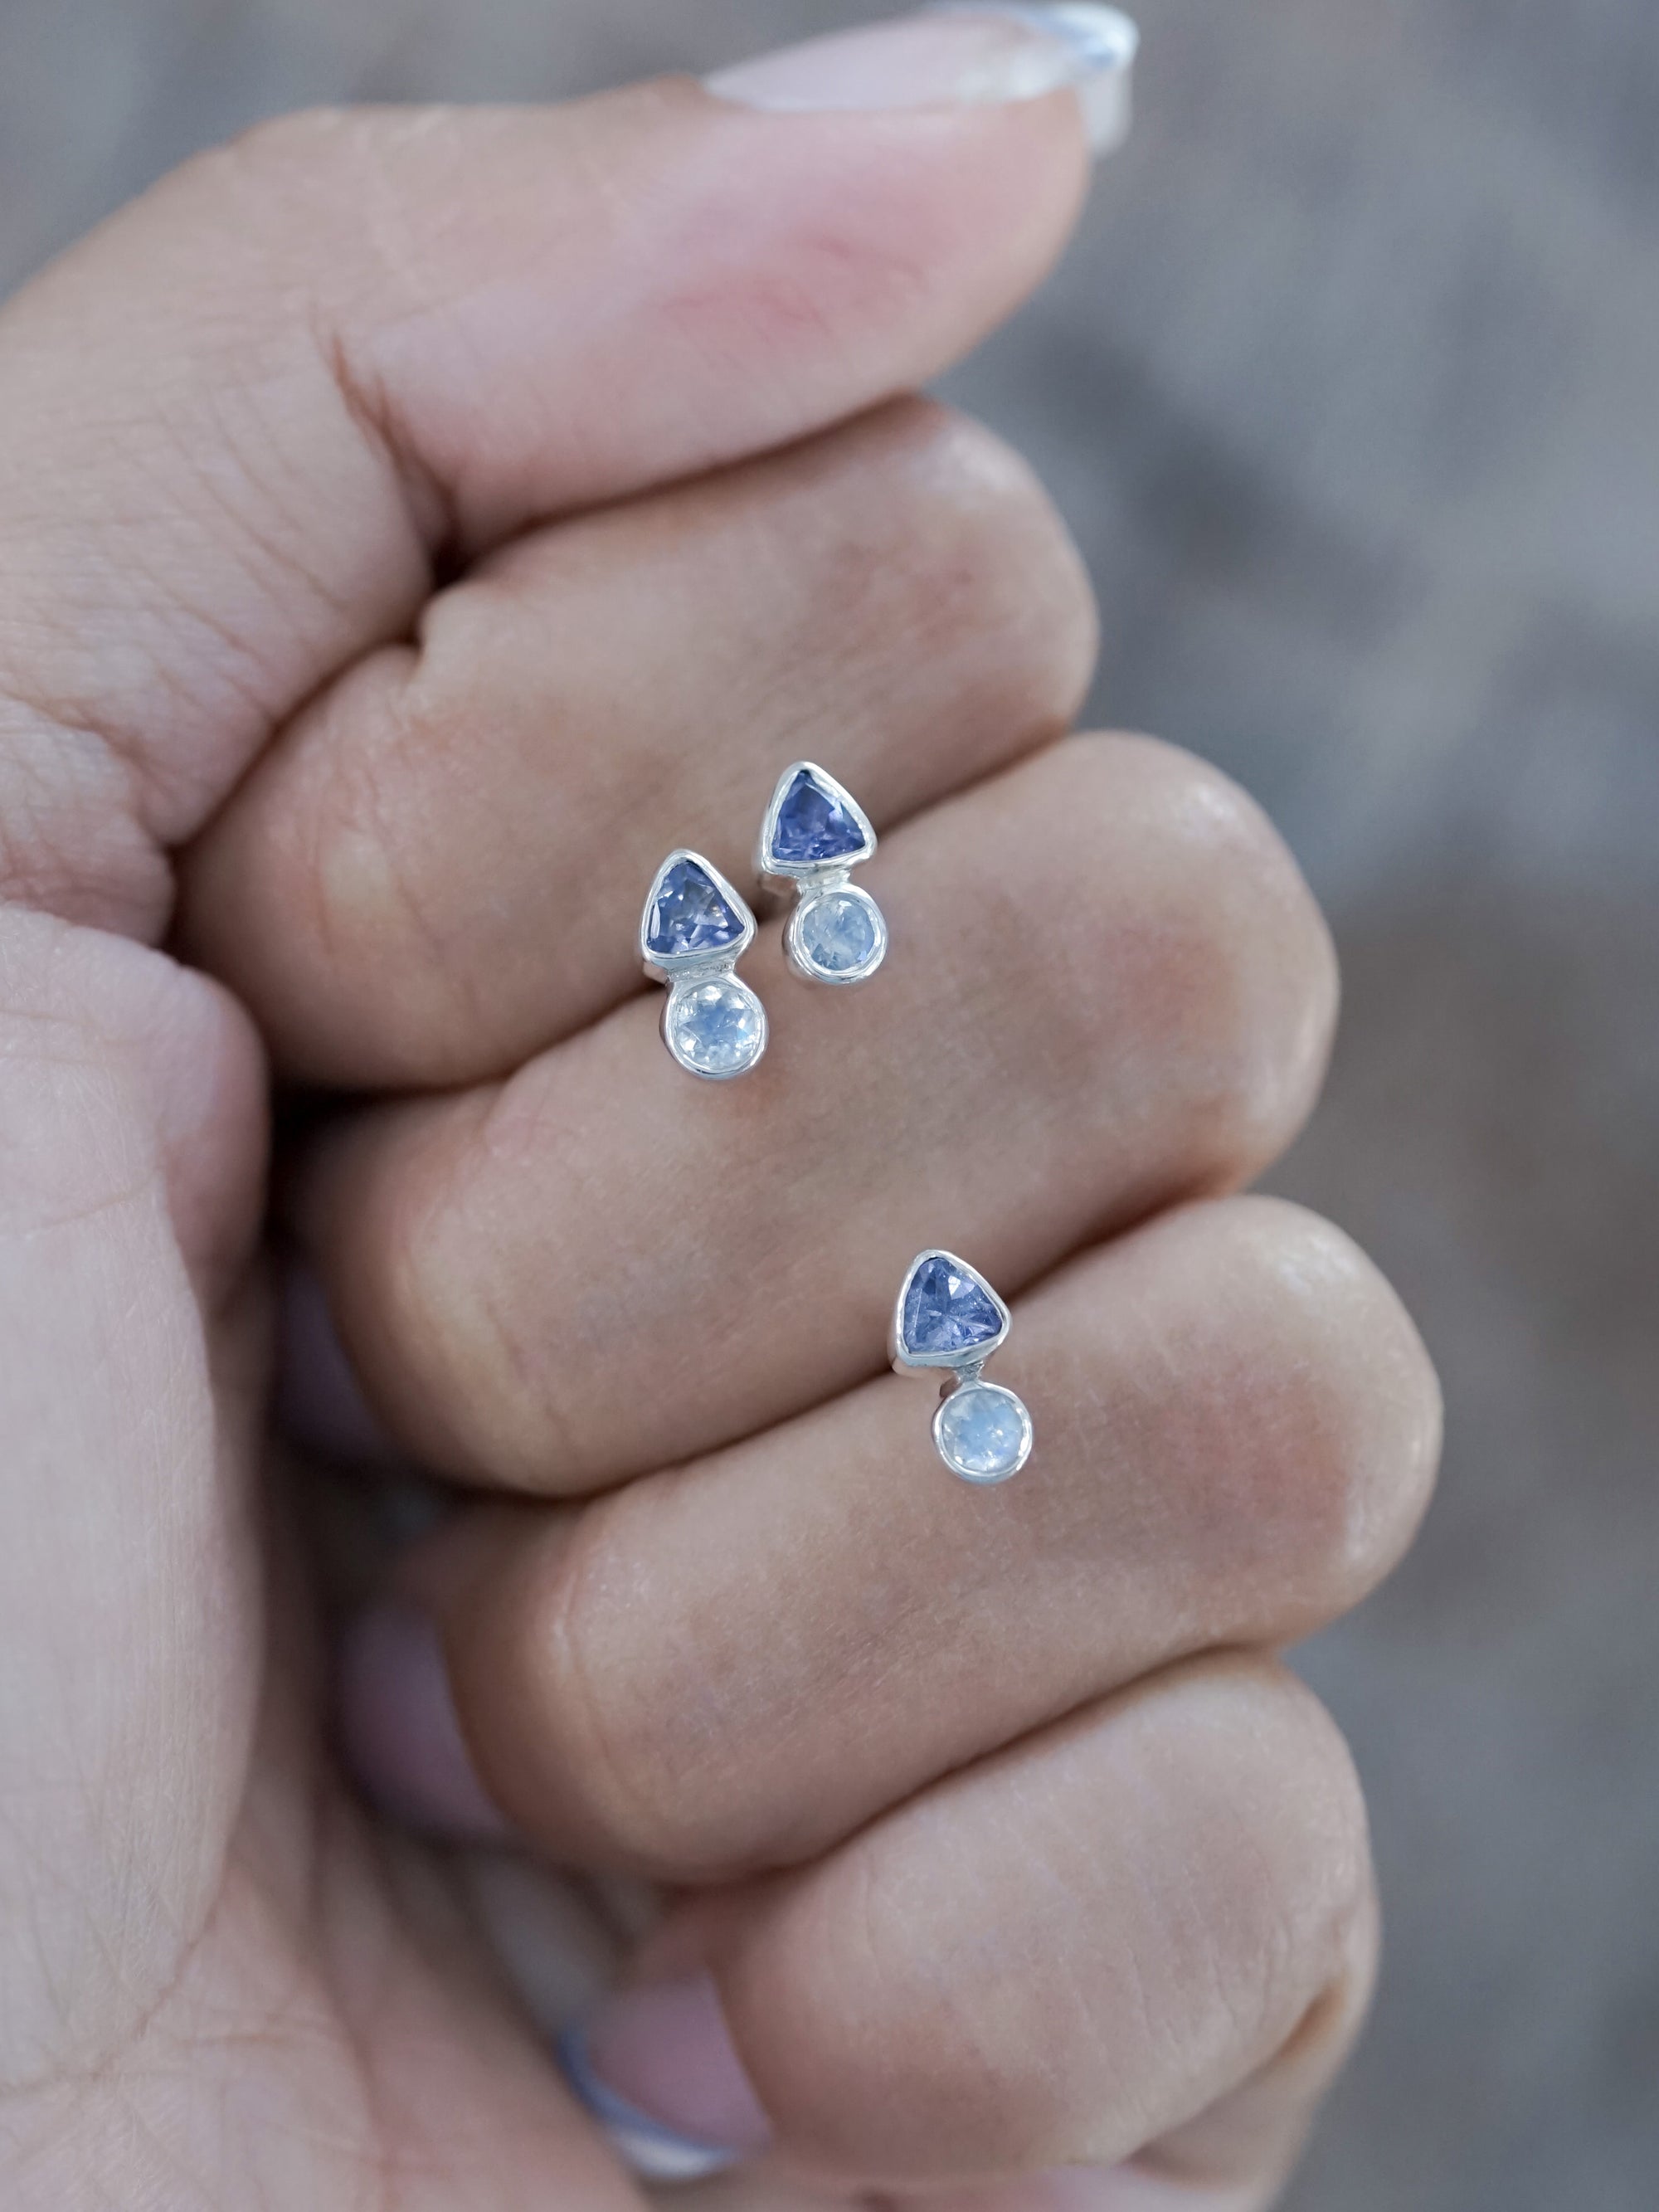 Tanzanite and Moonstone Earrings - Silver